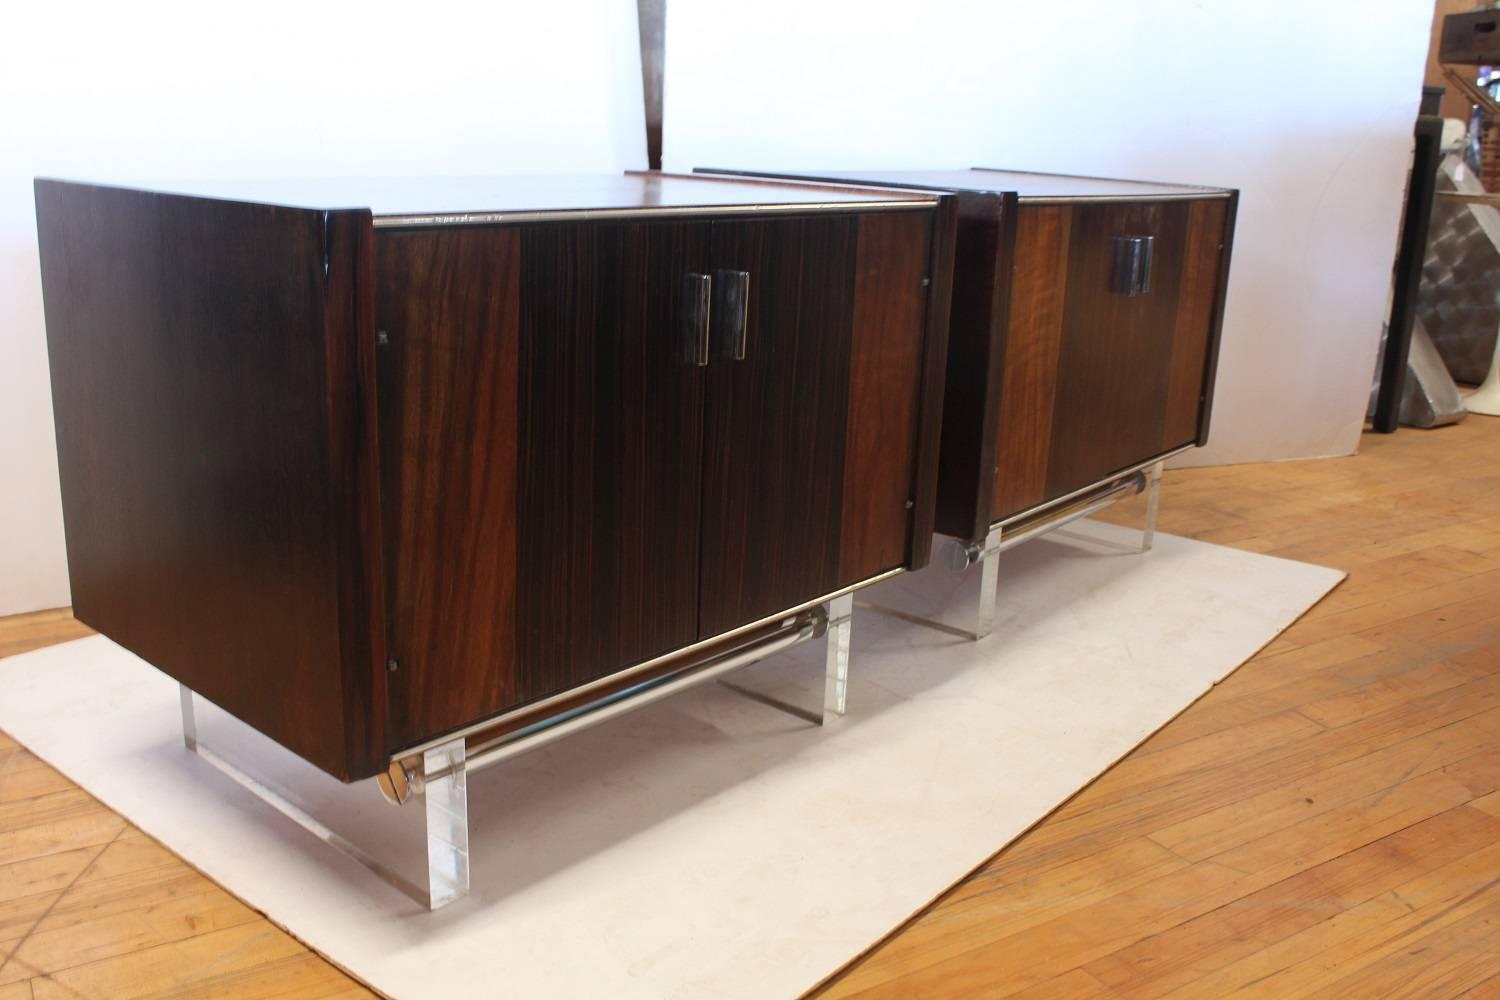 Stylish midcentury rosewood and lucite end tables, side tables with chrome hardware.